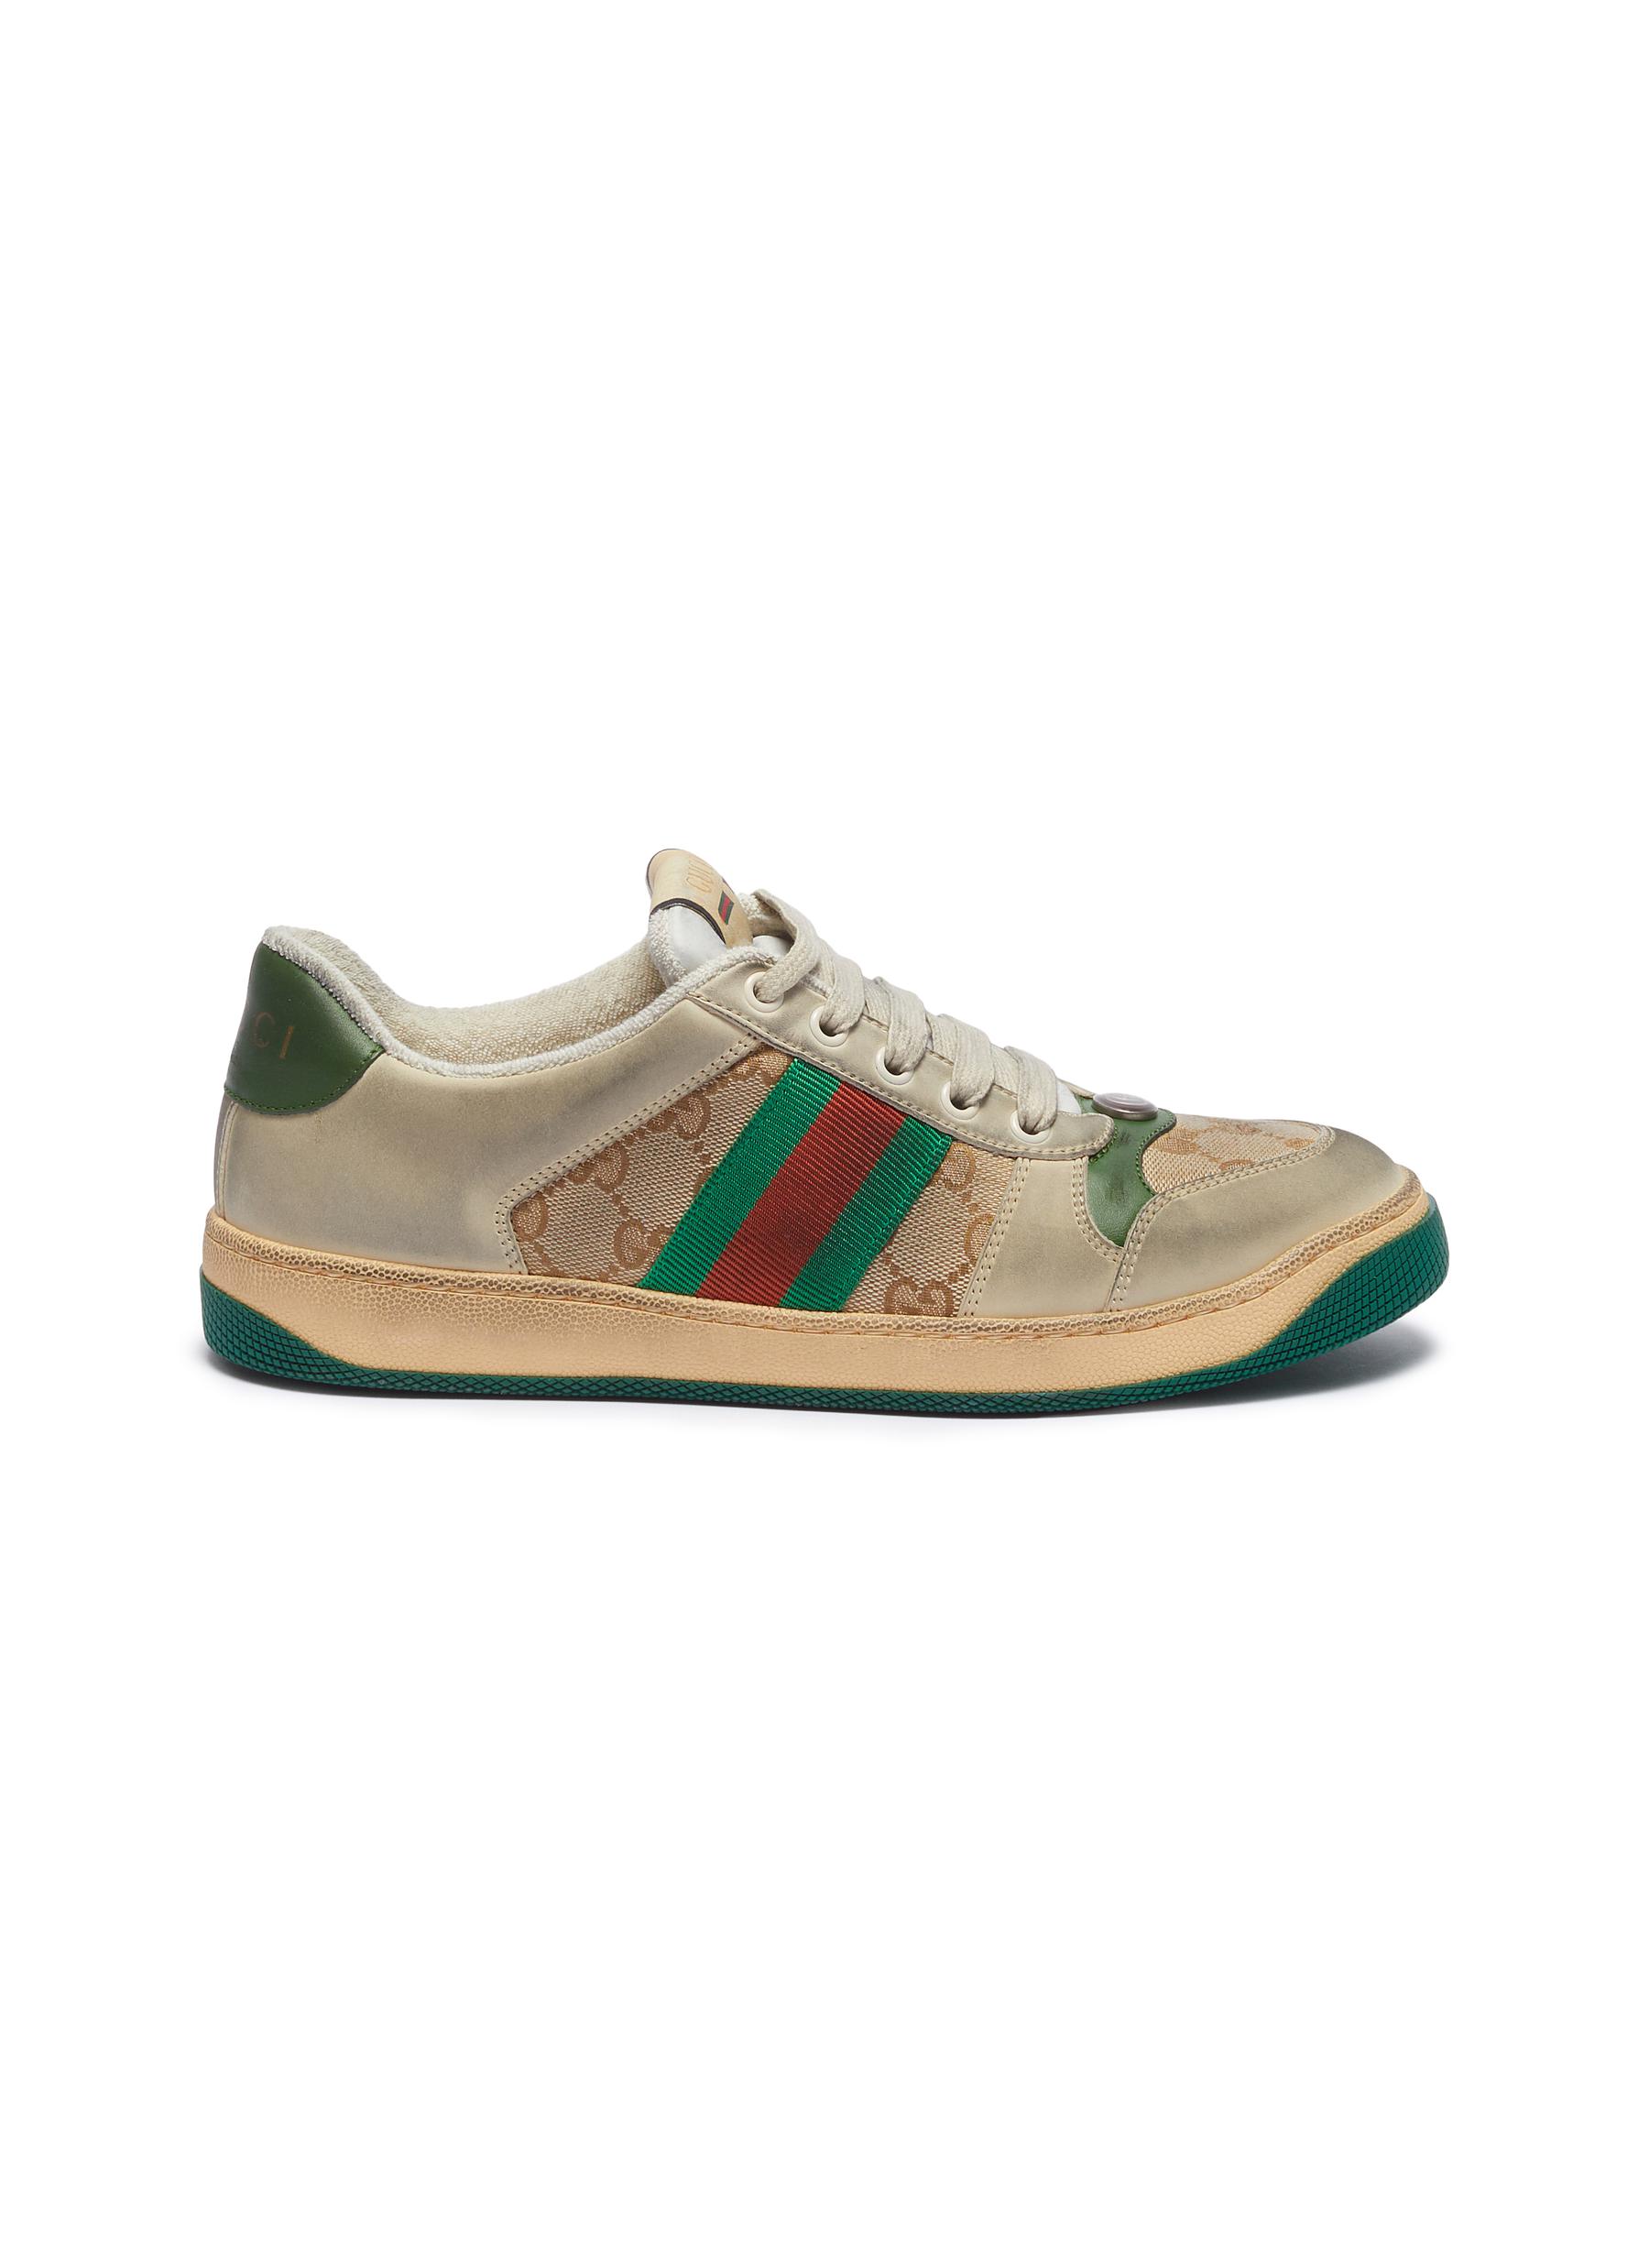 Gucci 'screener' Web Stripe Gg Canvas Panel Distressed Leather Sneakers ...